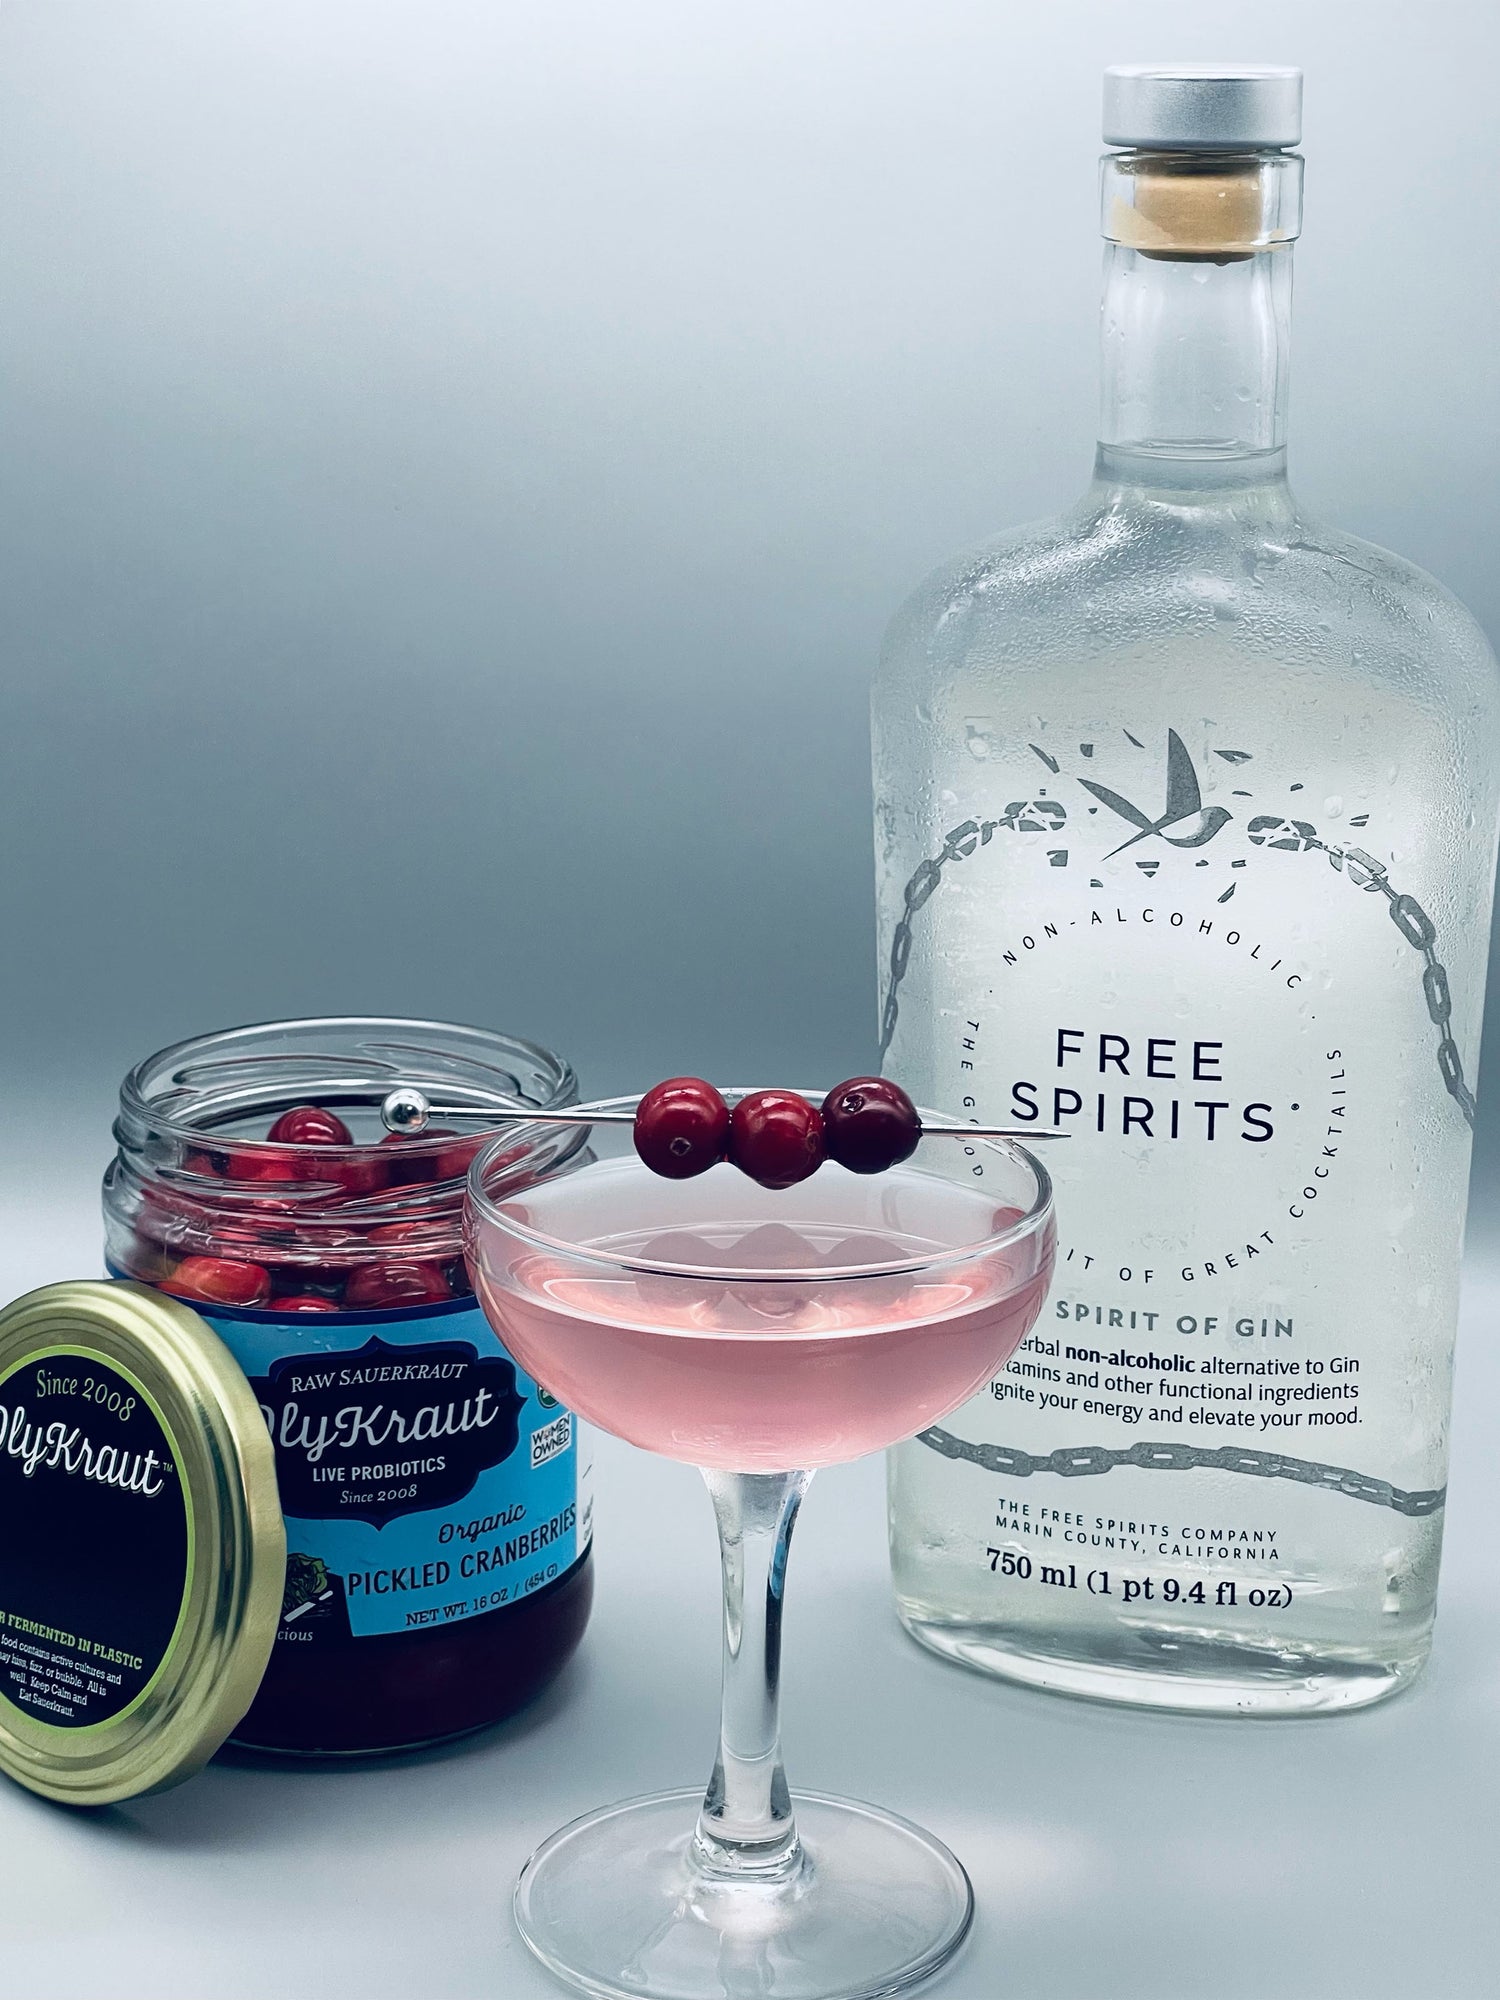 Pickled Cranberry Gibson - The Spirit of Gin